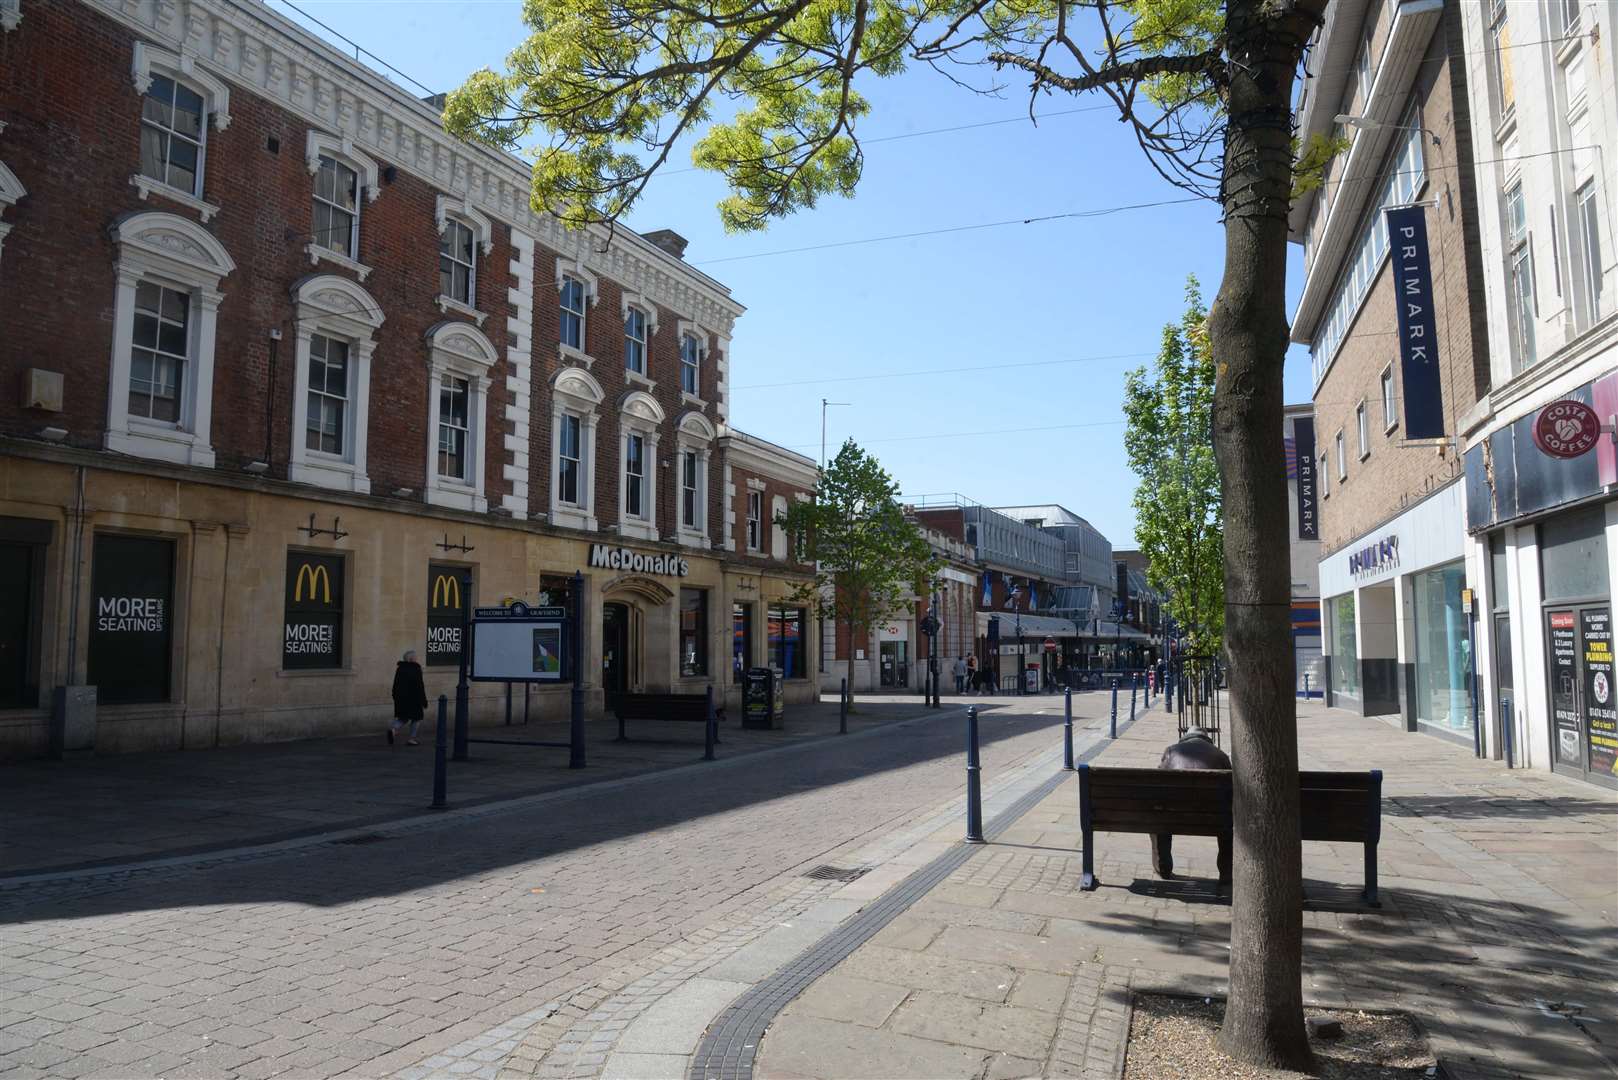 Gravesend town centre is recovering after its streets were quiet for so long. Picture: Chris Davey